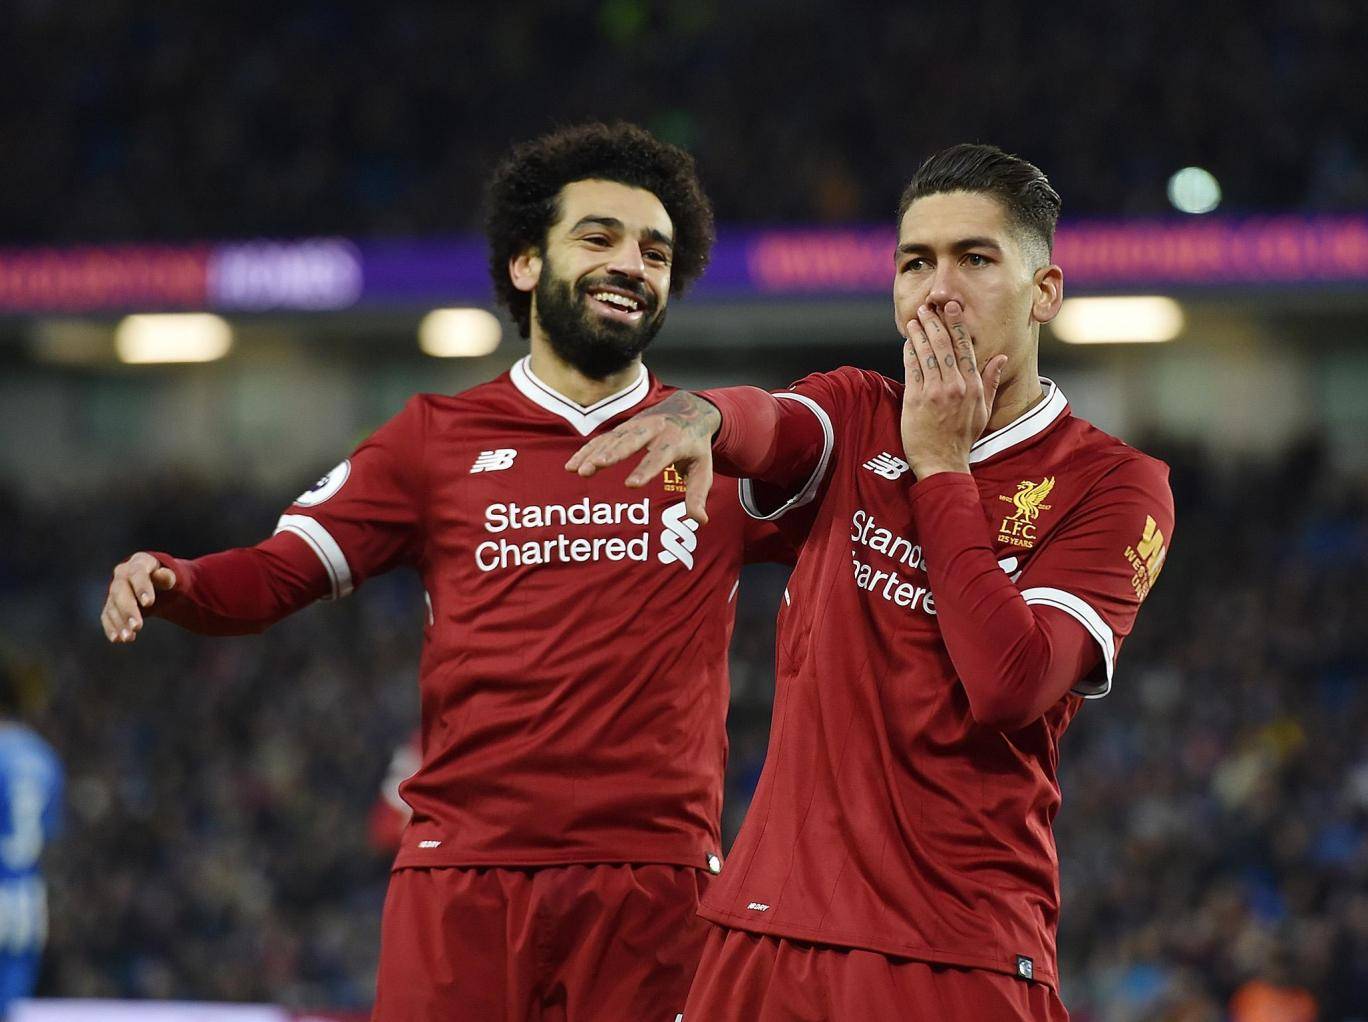 Brighton 1-5 Liverpool… With the participation of Mohammed Salah